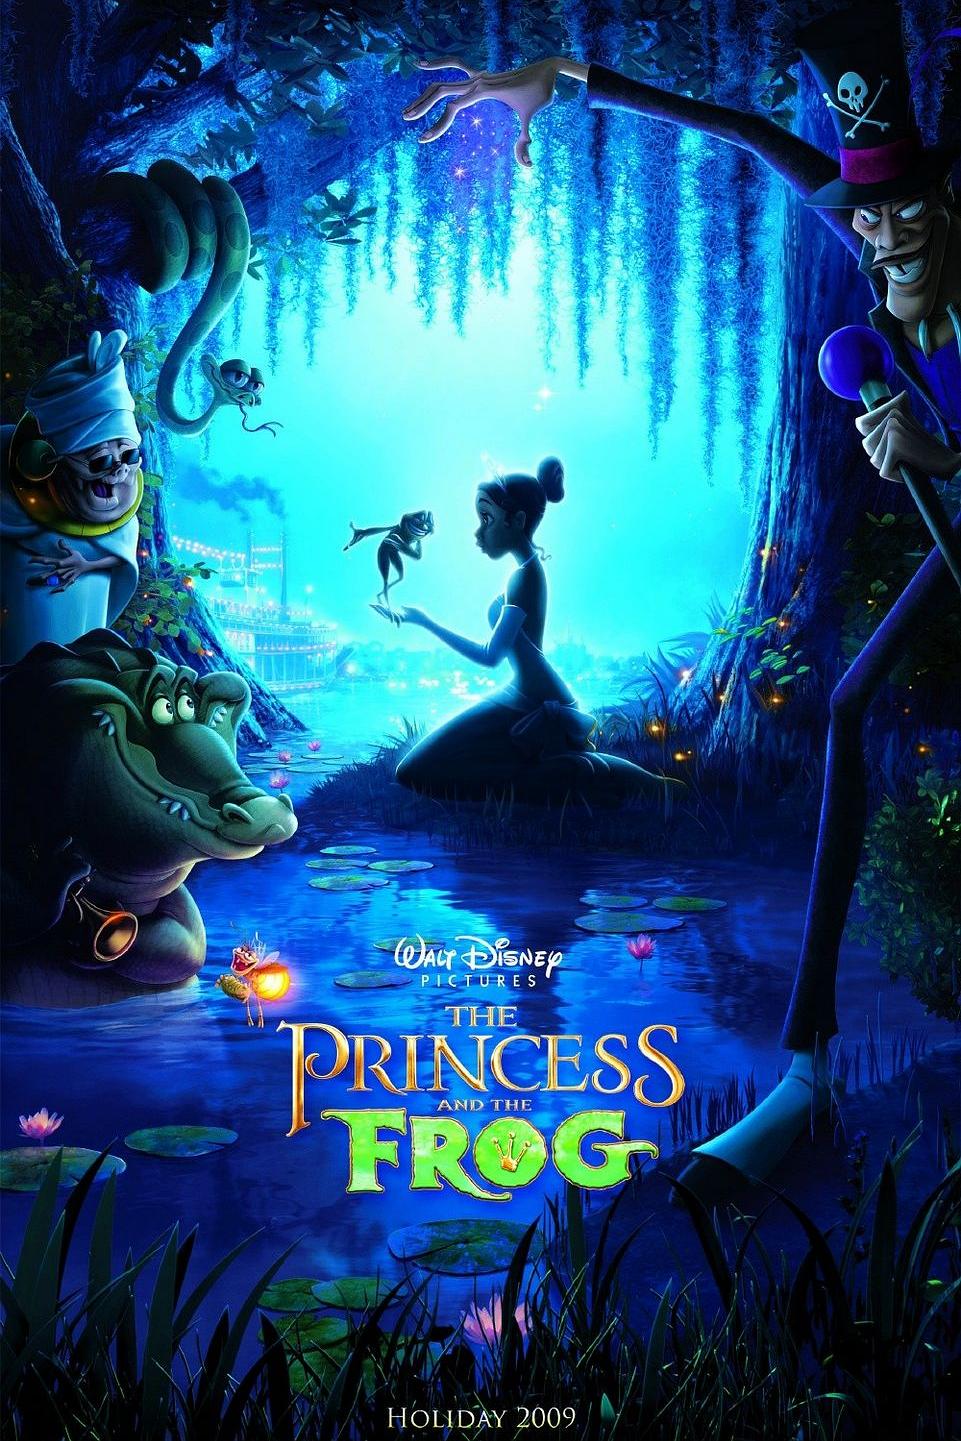  The.Princess.And.The.Frog.2009.1080p.Bluray.x264-LCHD 6.56GB-1.png